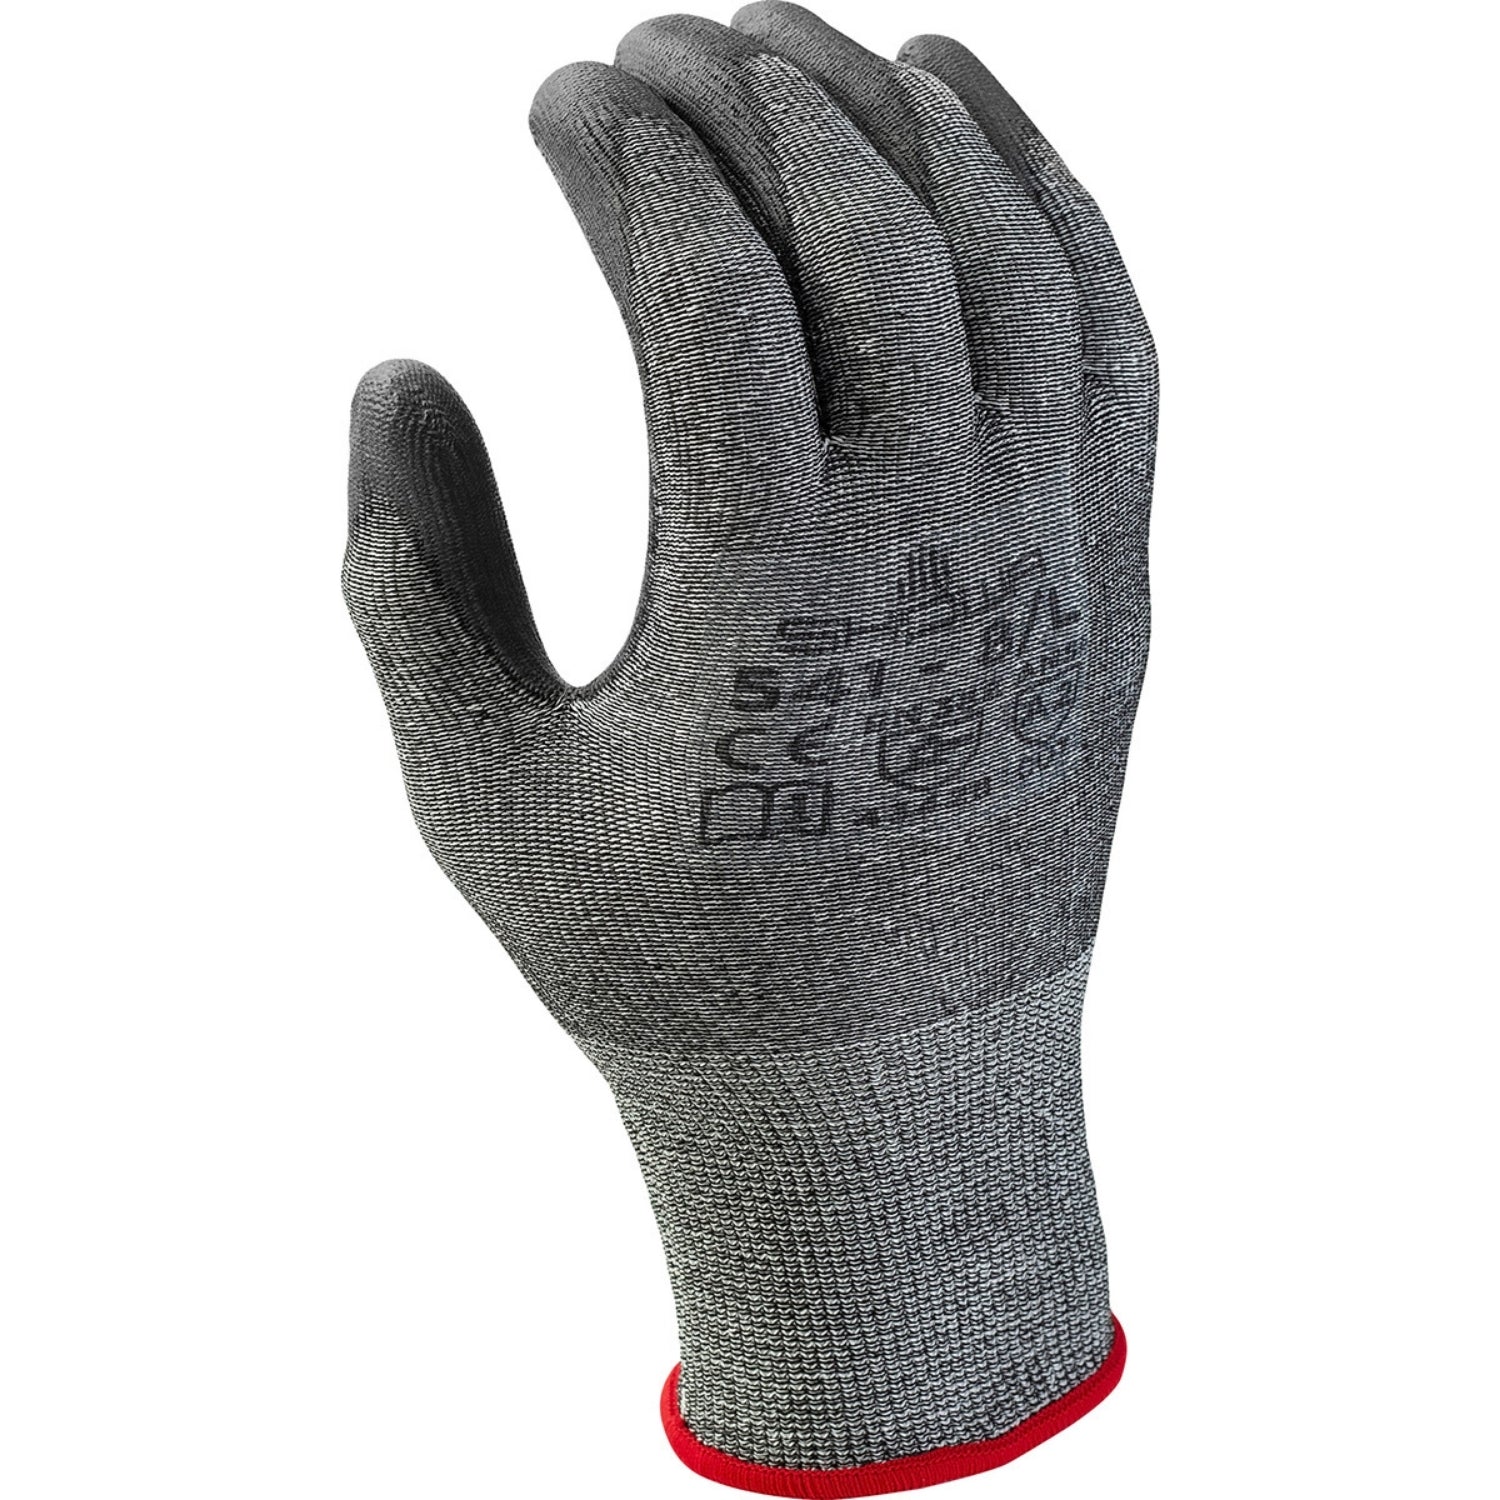 SHOWA 541 - Cut Resistant Gloves 6 Pack